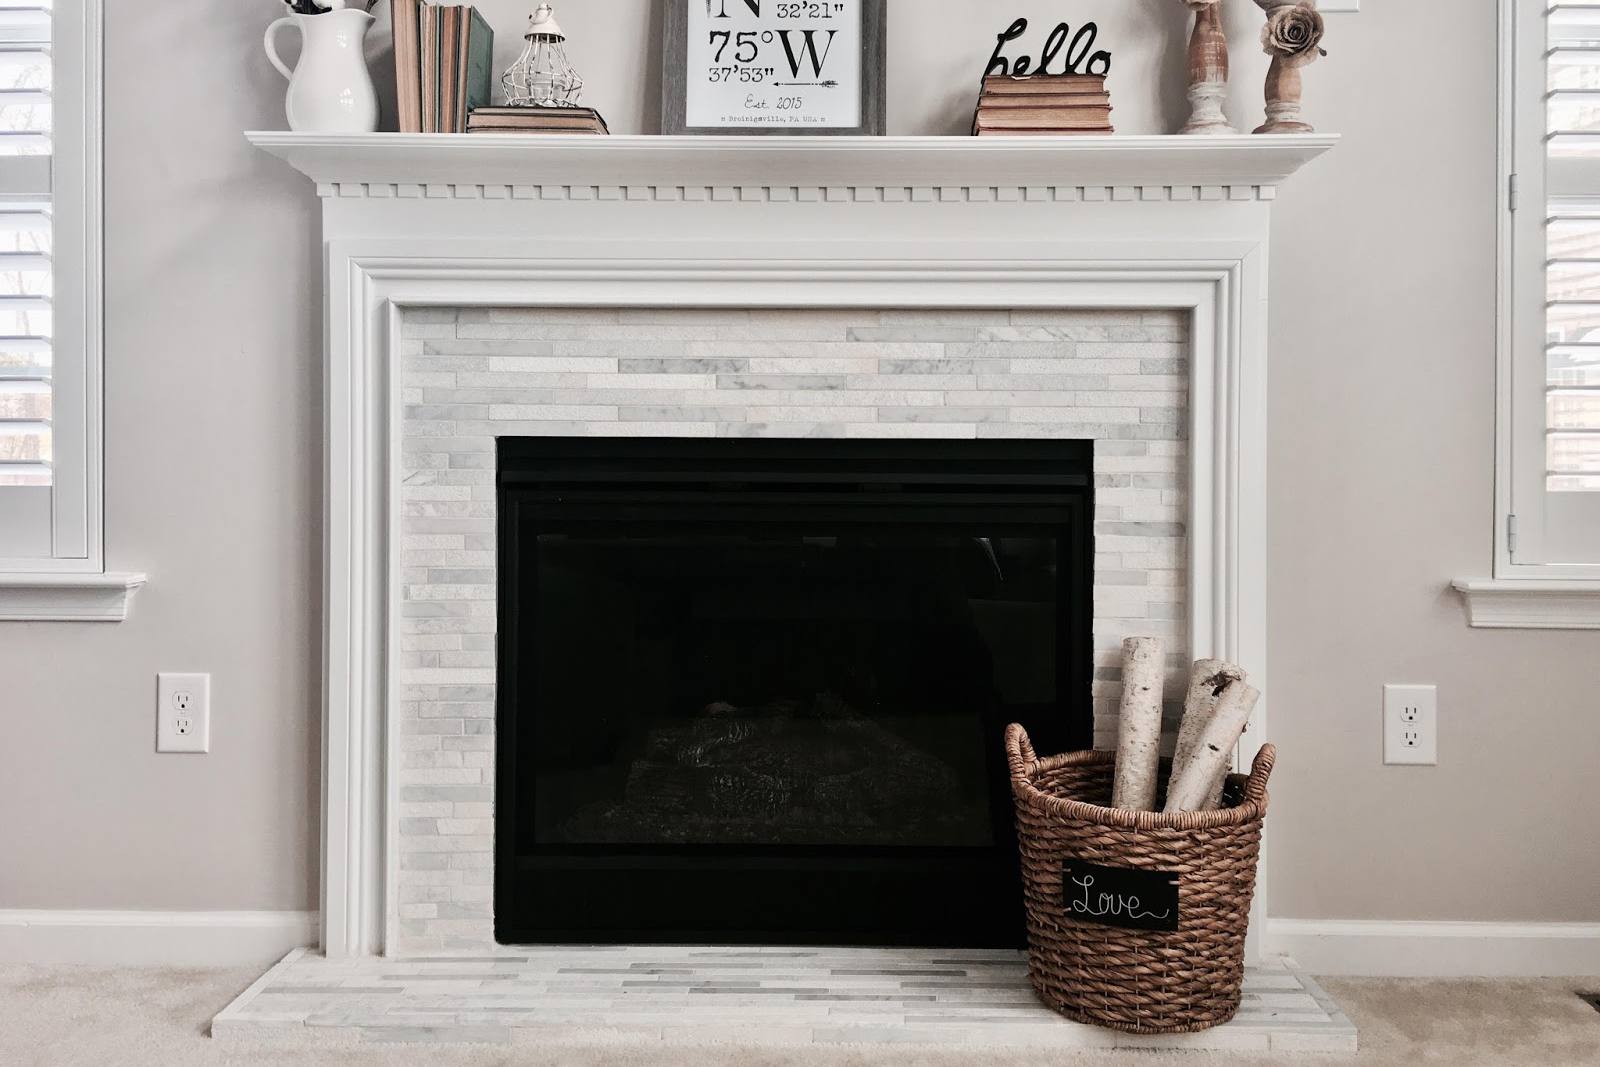 Fireplace Mantels for Sale Craigslist New 25 Beautifully Tiled Fireplaces